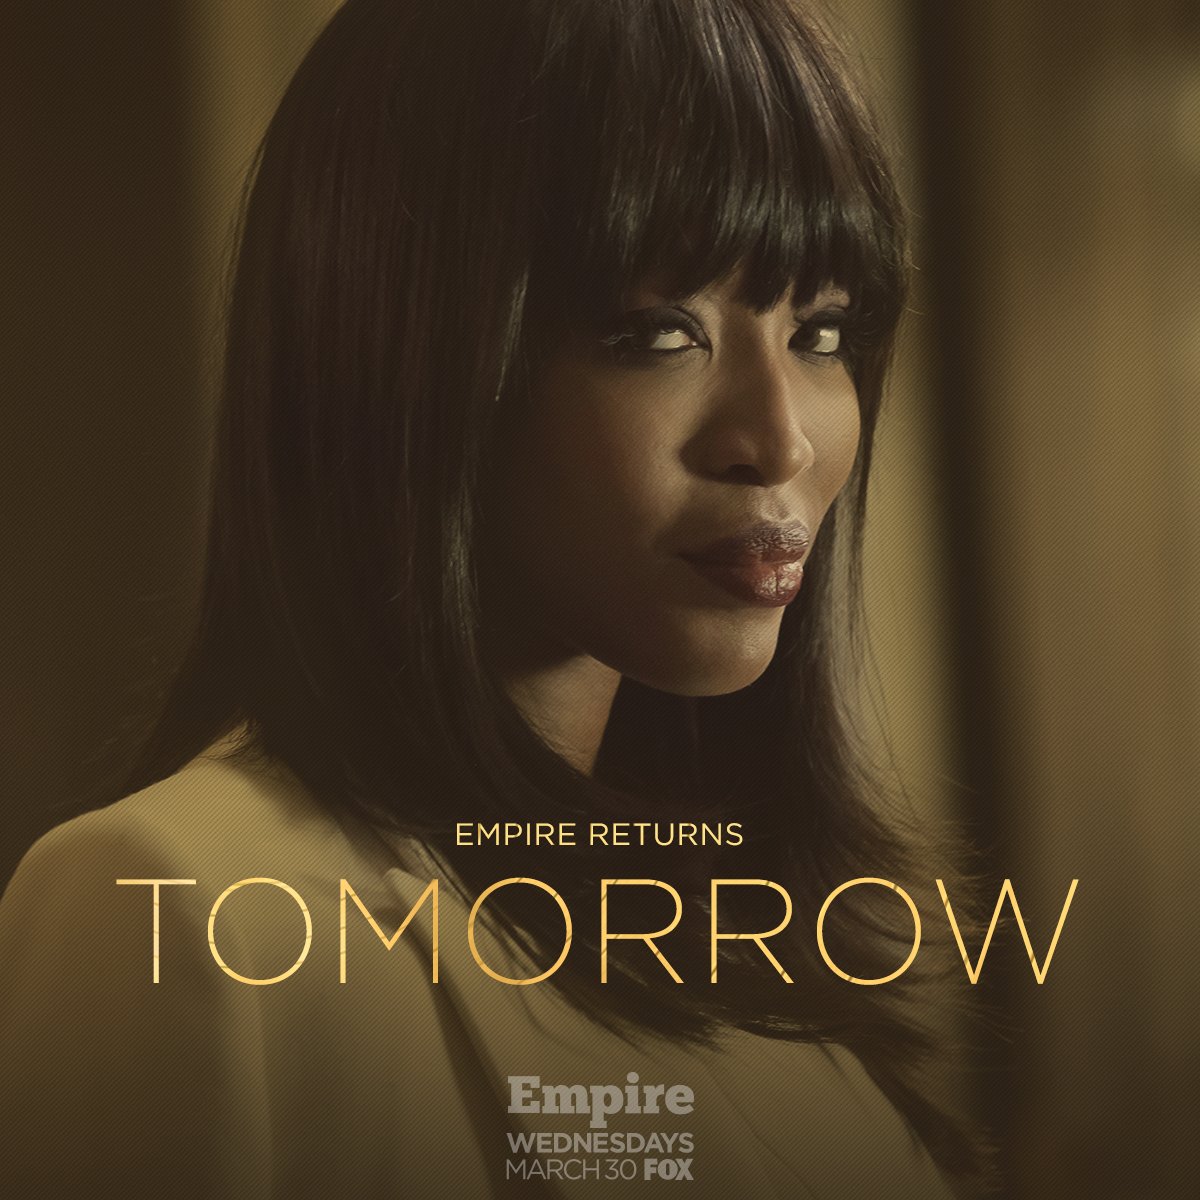 RT @AllthingsFOX30: Is @NaomiCampbell really running the #Empire? Find out tomorrow during an all-new episode of @EmpireFOX  at 9 p.m.! htt…